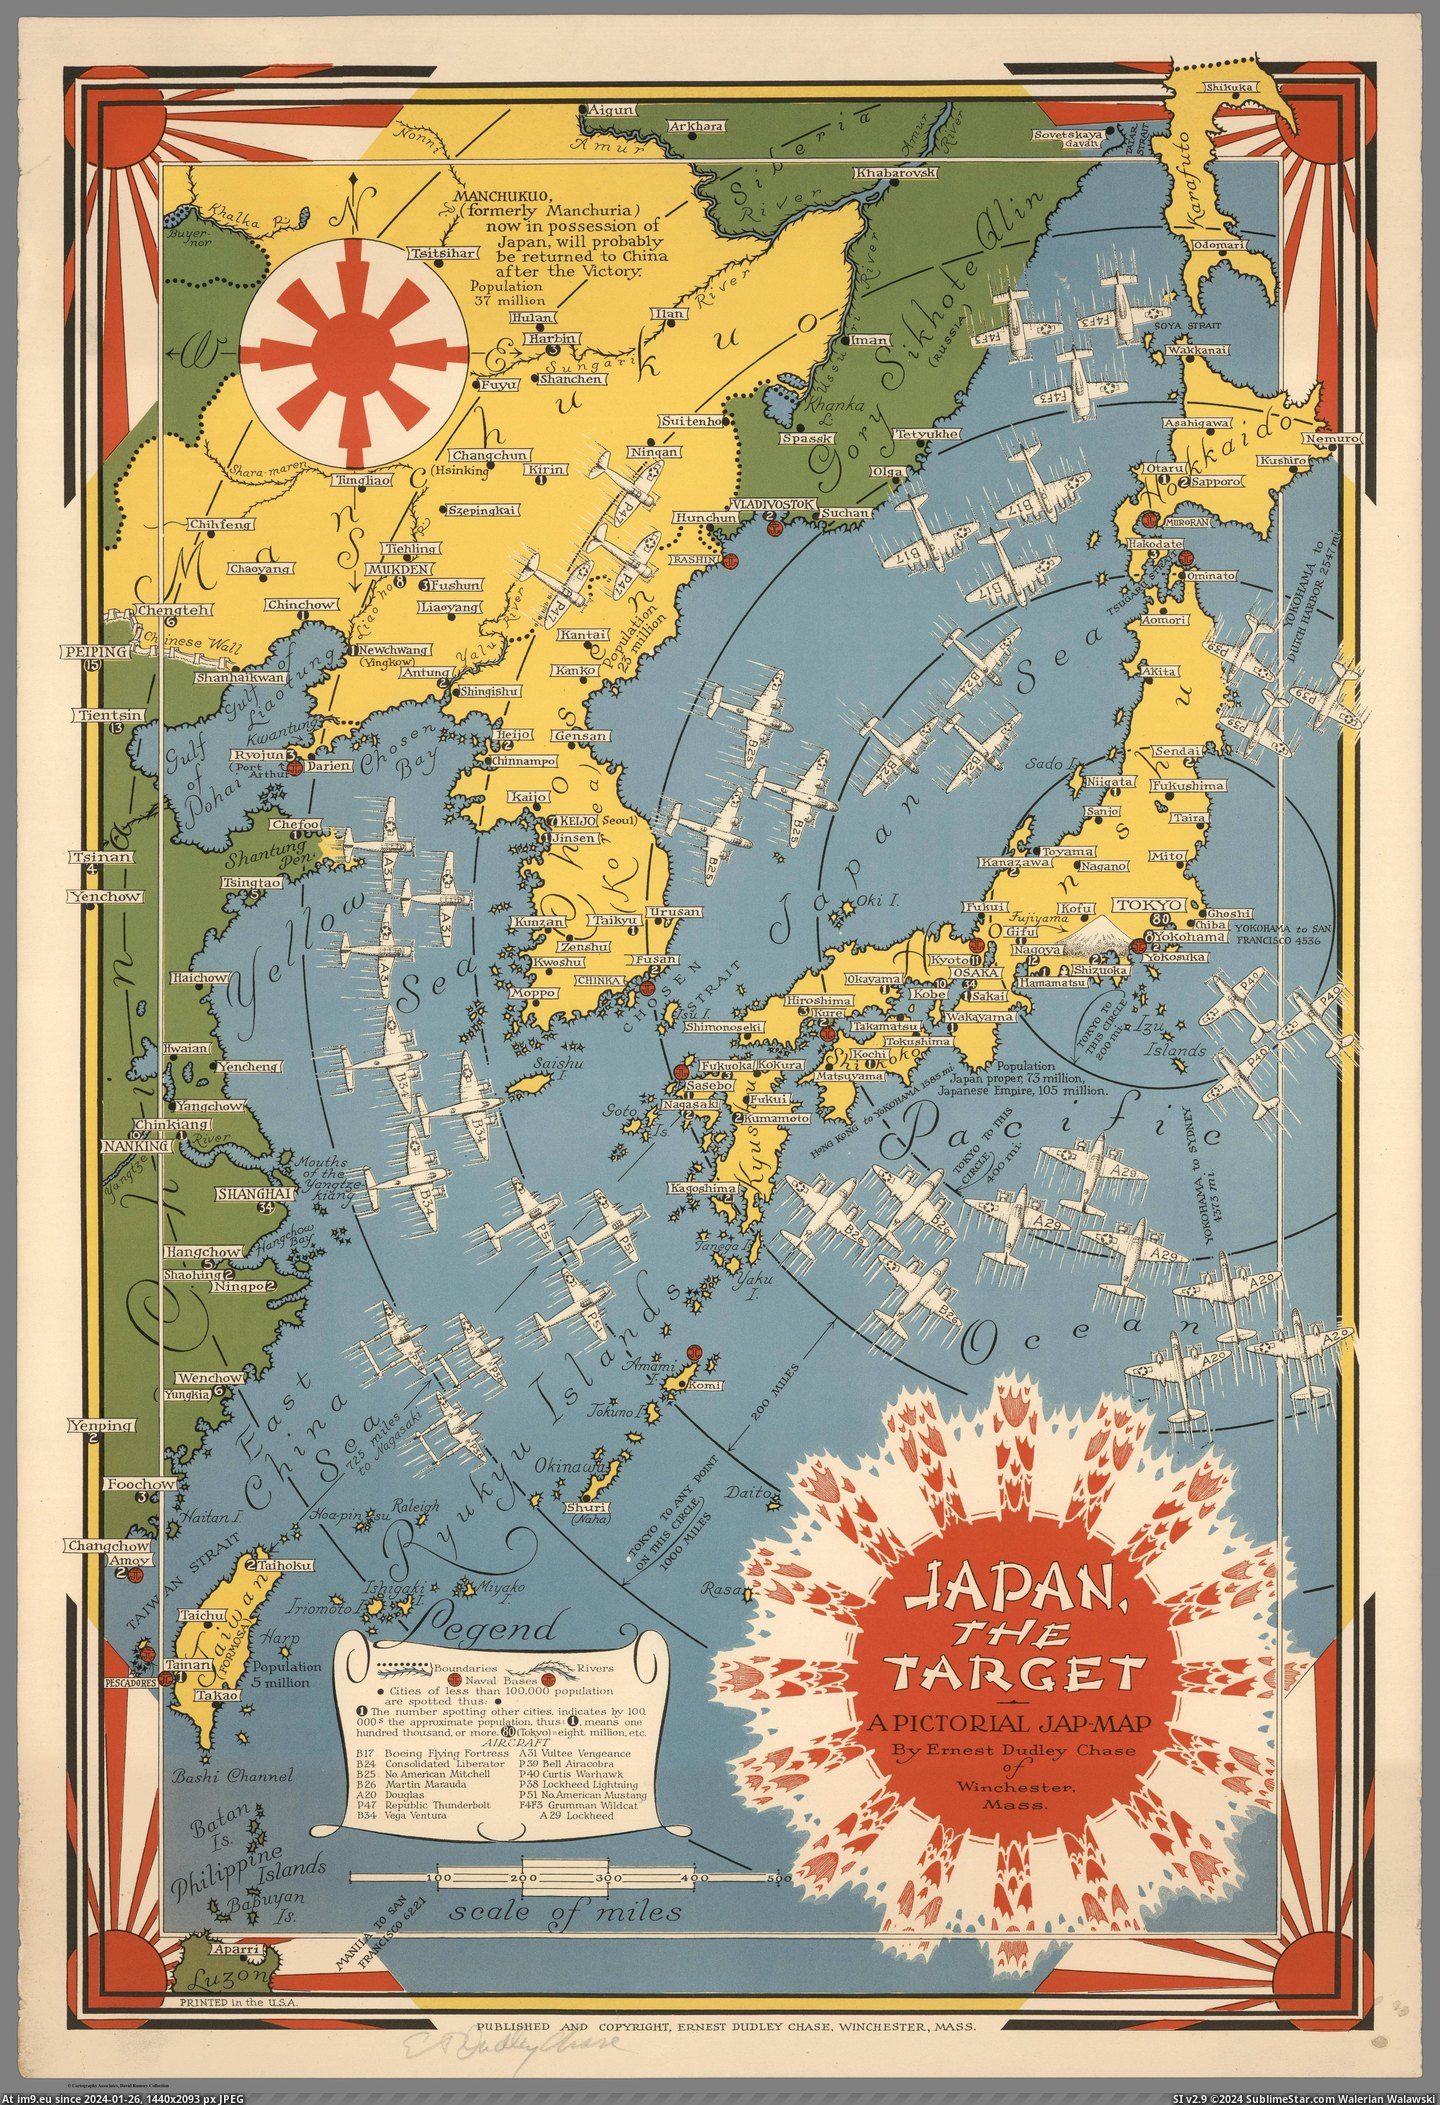 #Map #Japan #Ernest #Pictorial #Dudley #Chase #Target [Mapporn] Japan the Target, a pictorial map made by Ernest Dudley Chase, 1942 [4003x5830] Pic. (Изображение из альбом My r/MAPS favs))